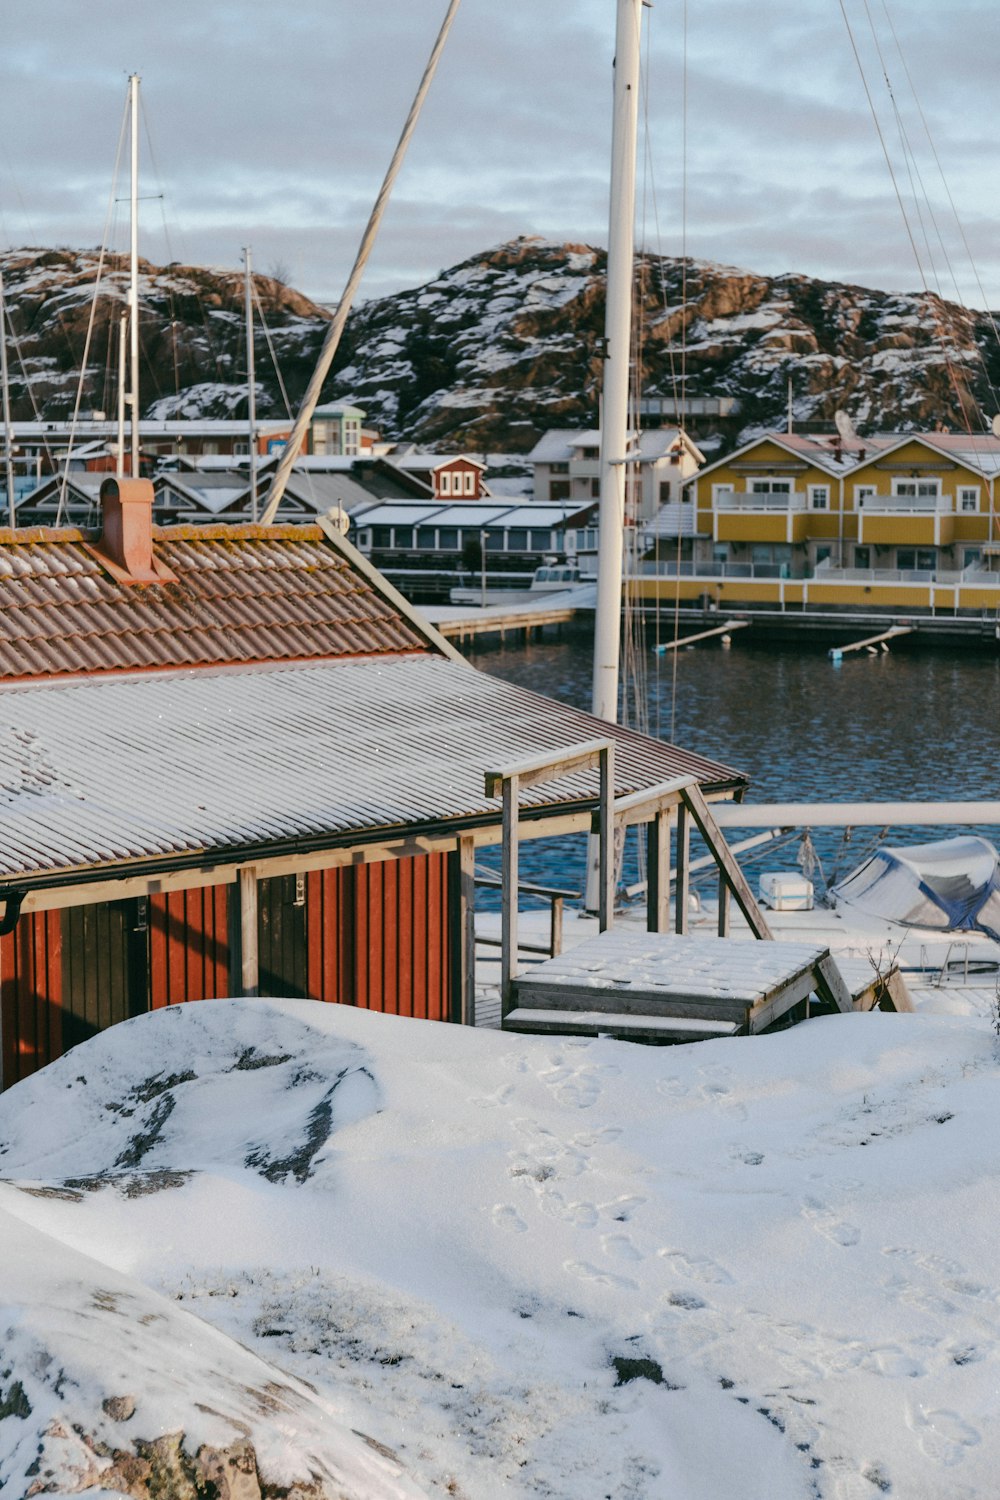 a boat is docked in a harbor with snow on the ground